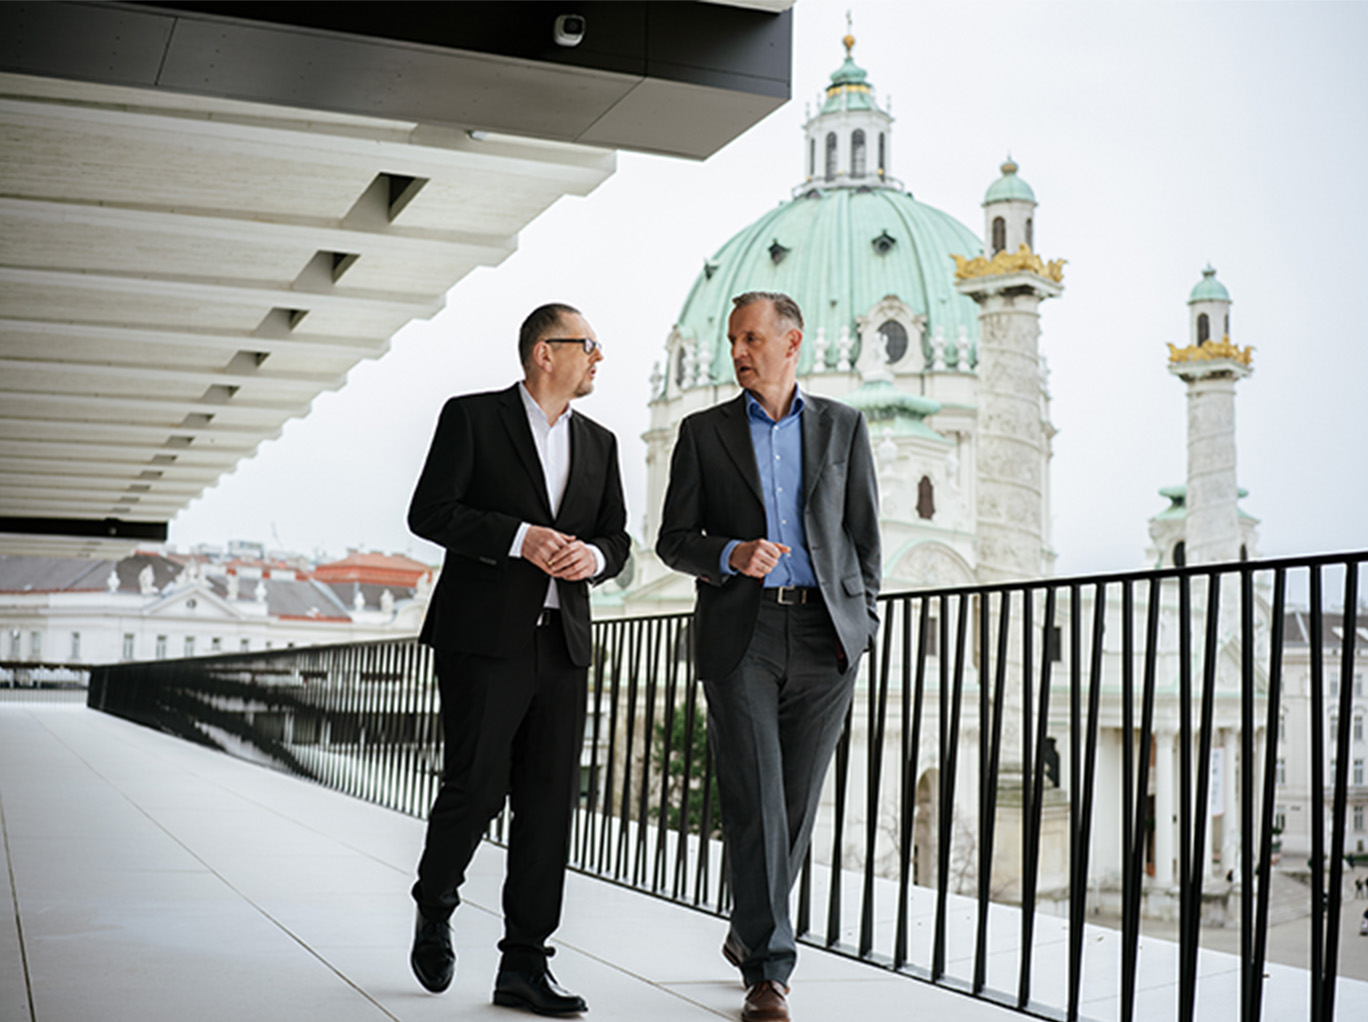 Chief Executive Officer Martin Krajcsir and Deputy Chief Executive Officer Peter Weinelt are walking across the terrace of the Wien Museum. They are in conversation with each other and the Karlskirche can be seen in the background.